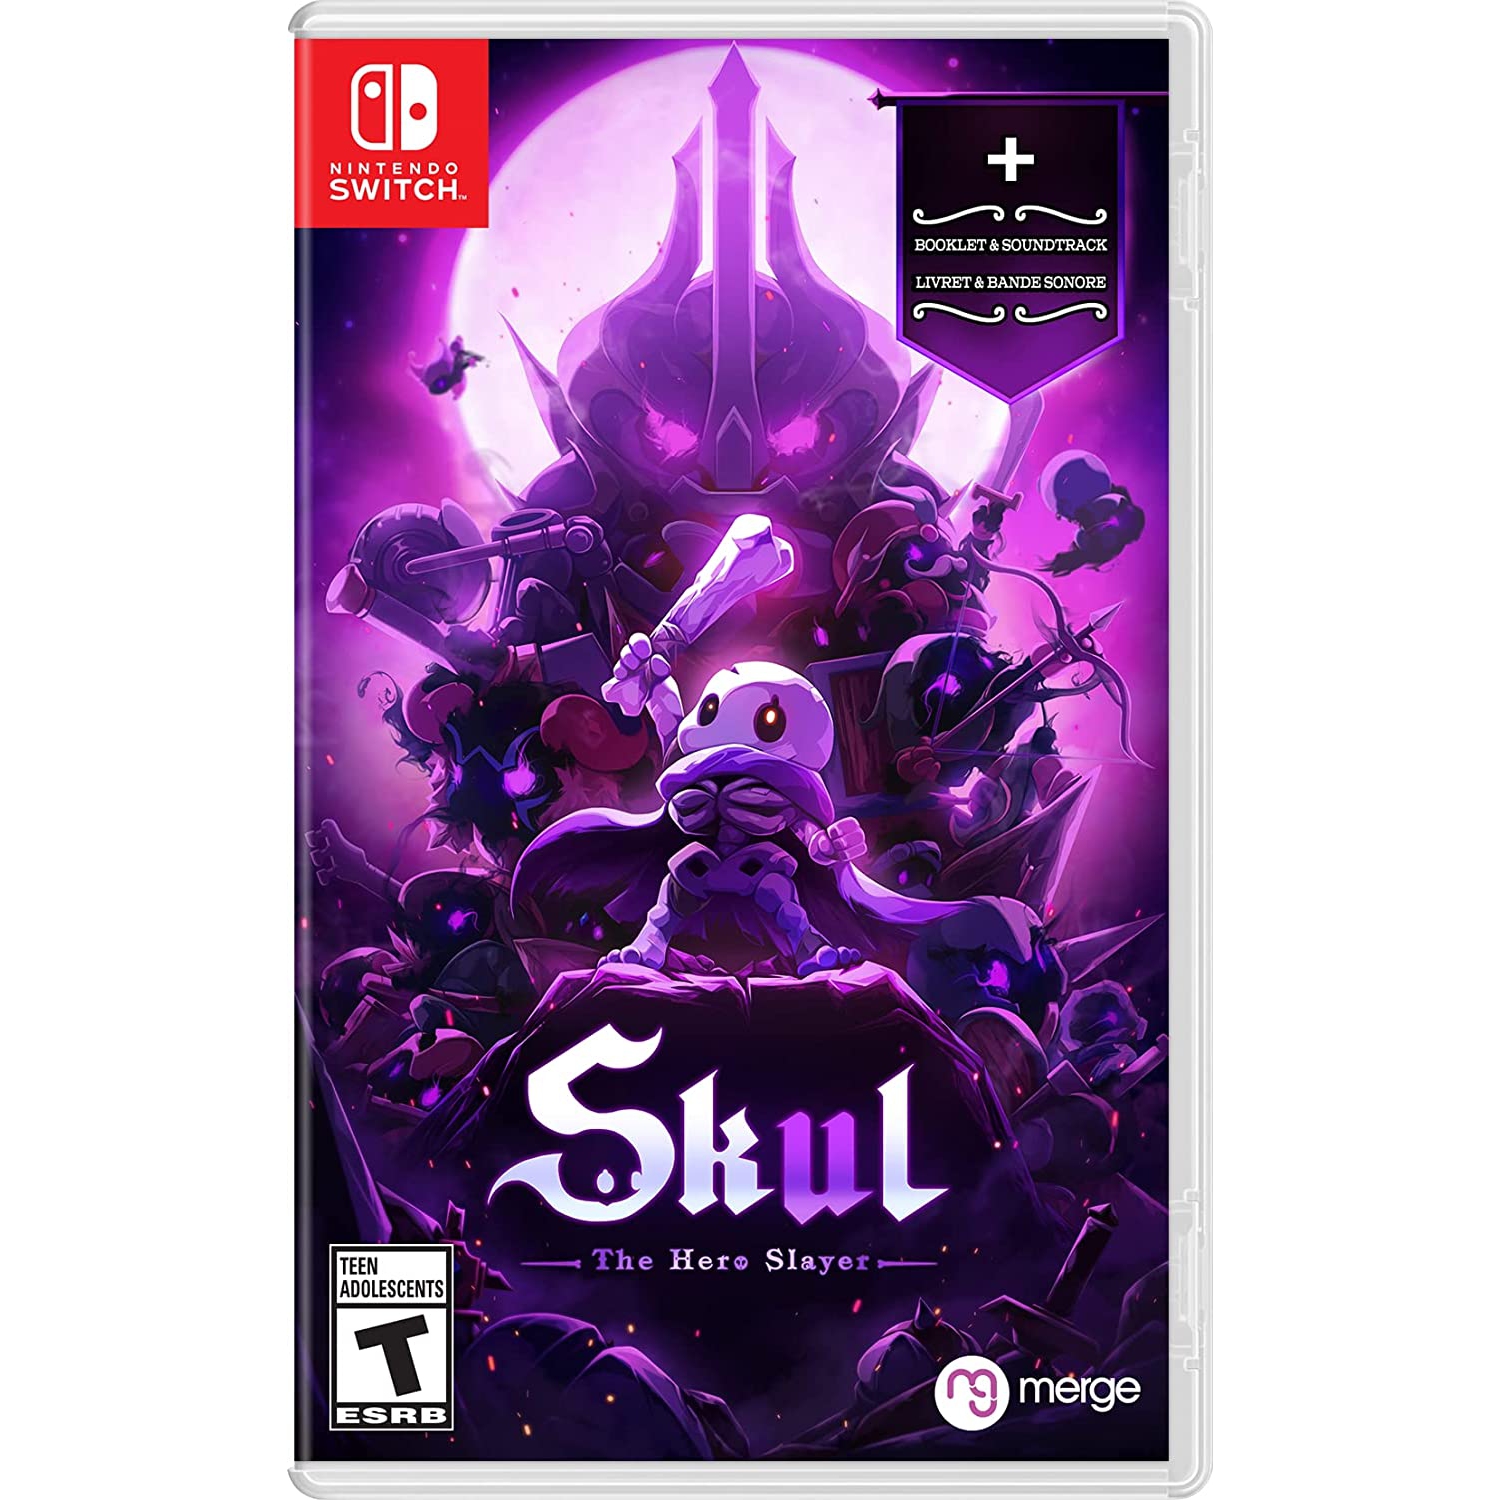 Skul The Hero Slayer -Nintendo Switch Games and Software